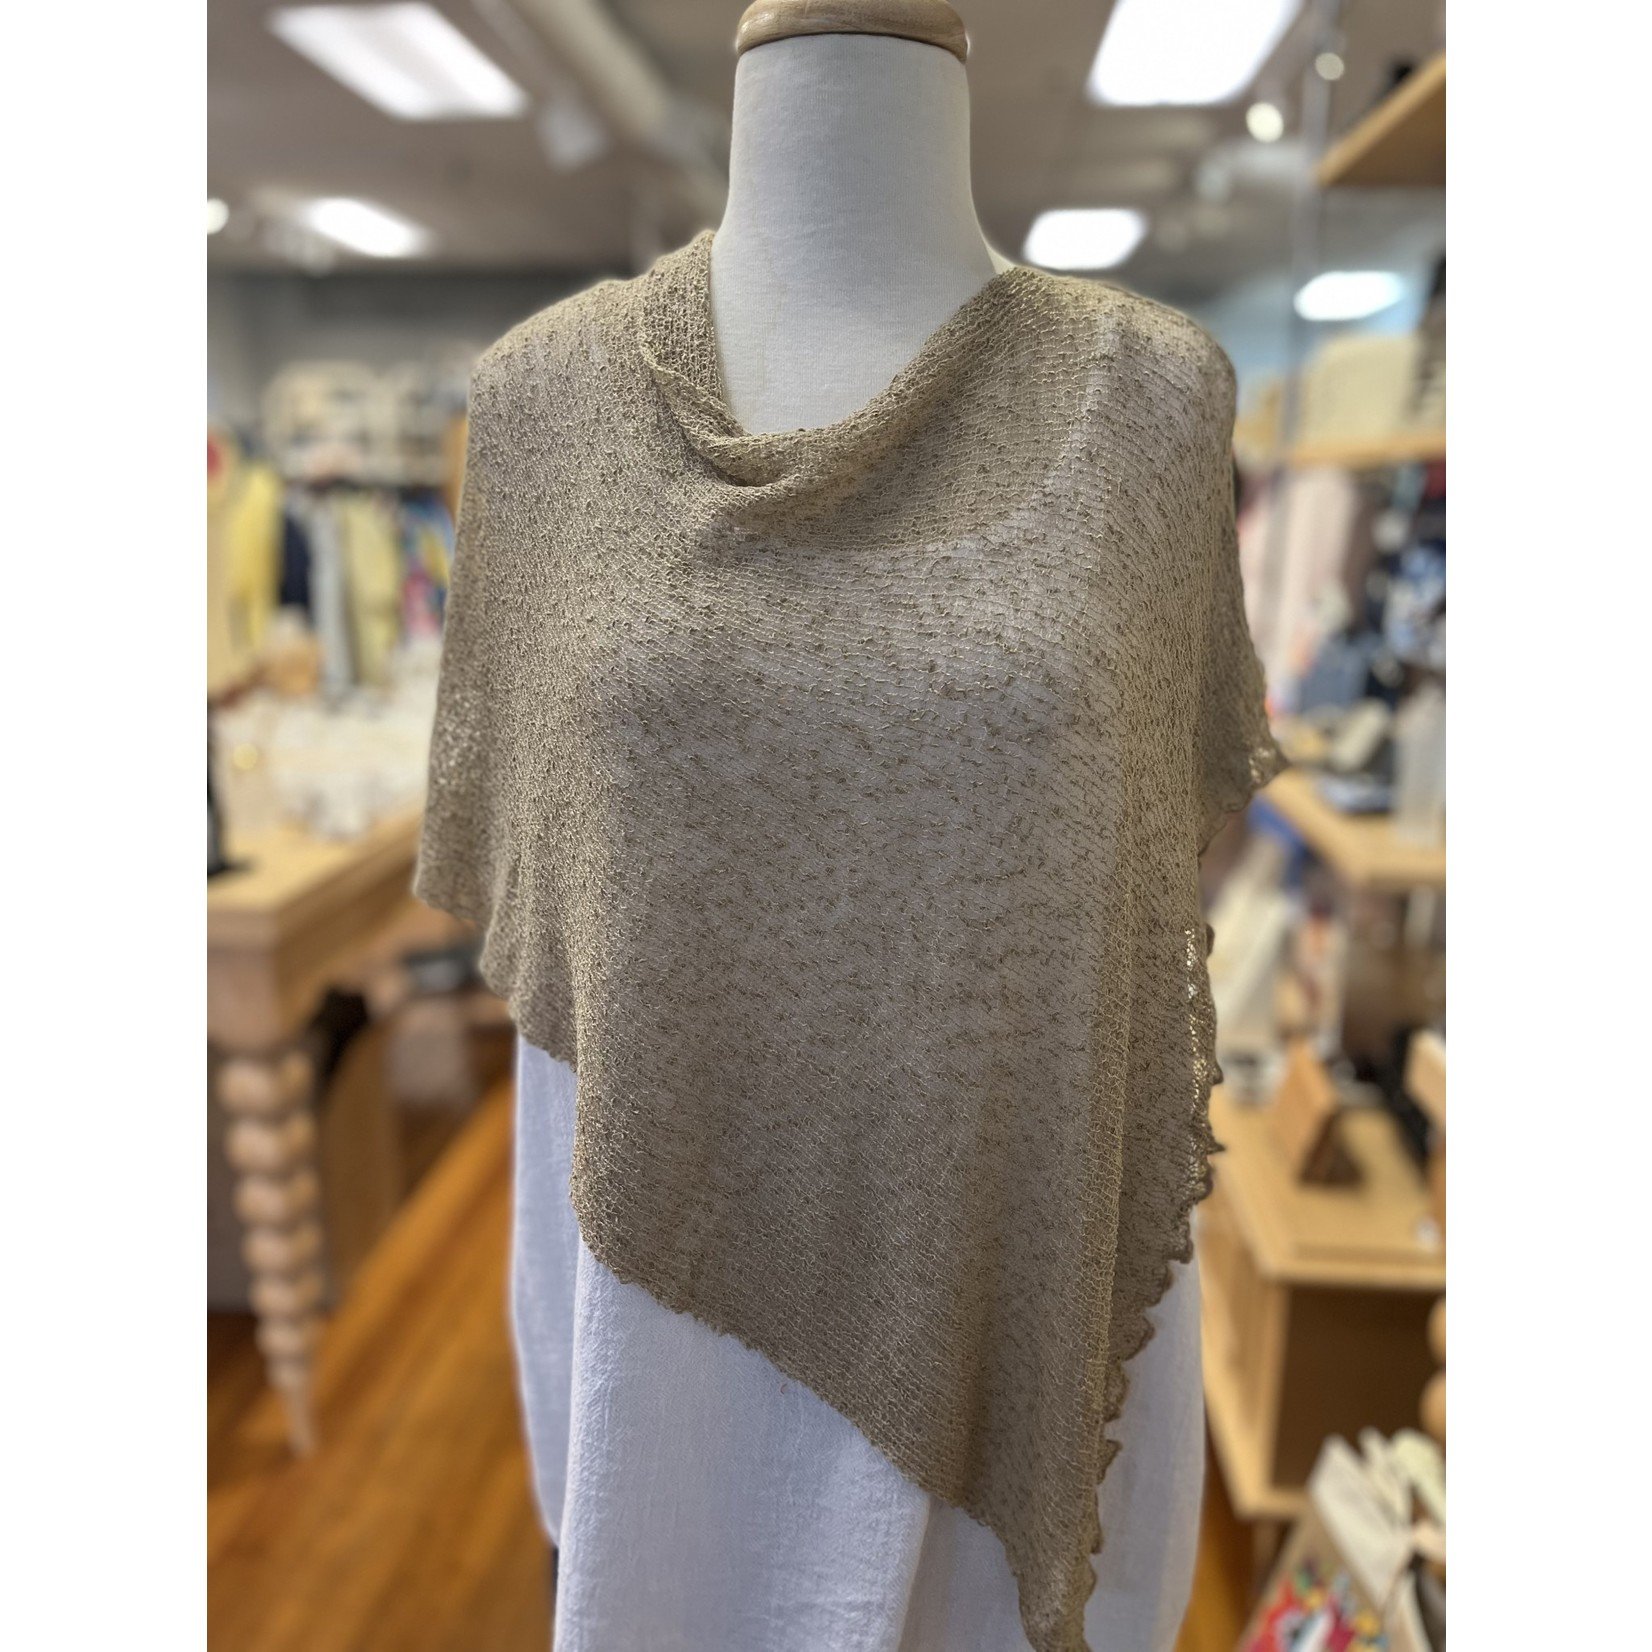 Lost River Imports Lightweight 5-way Poncho in Latte (10)